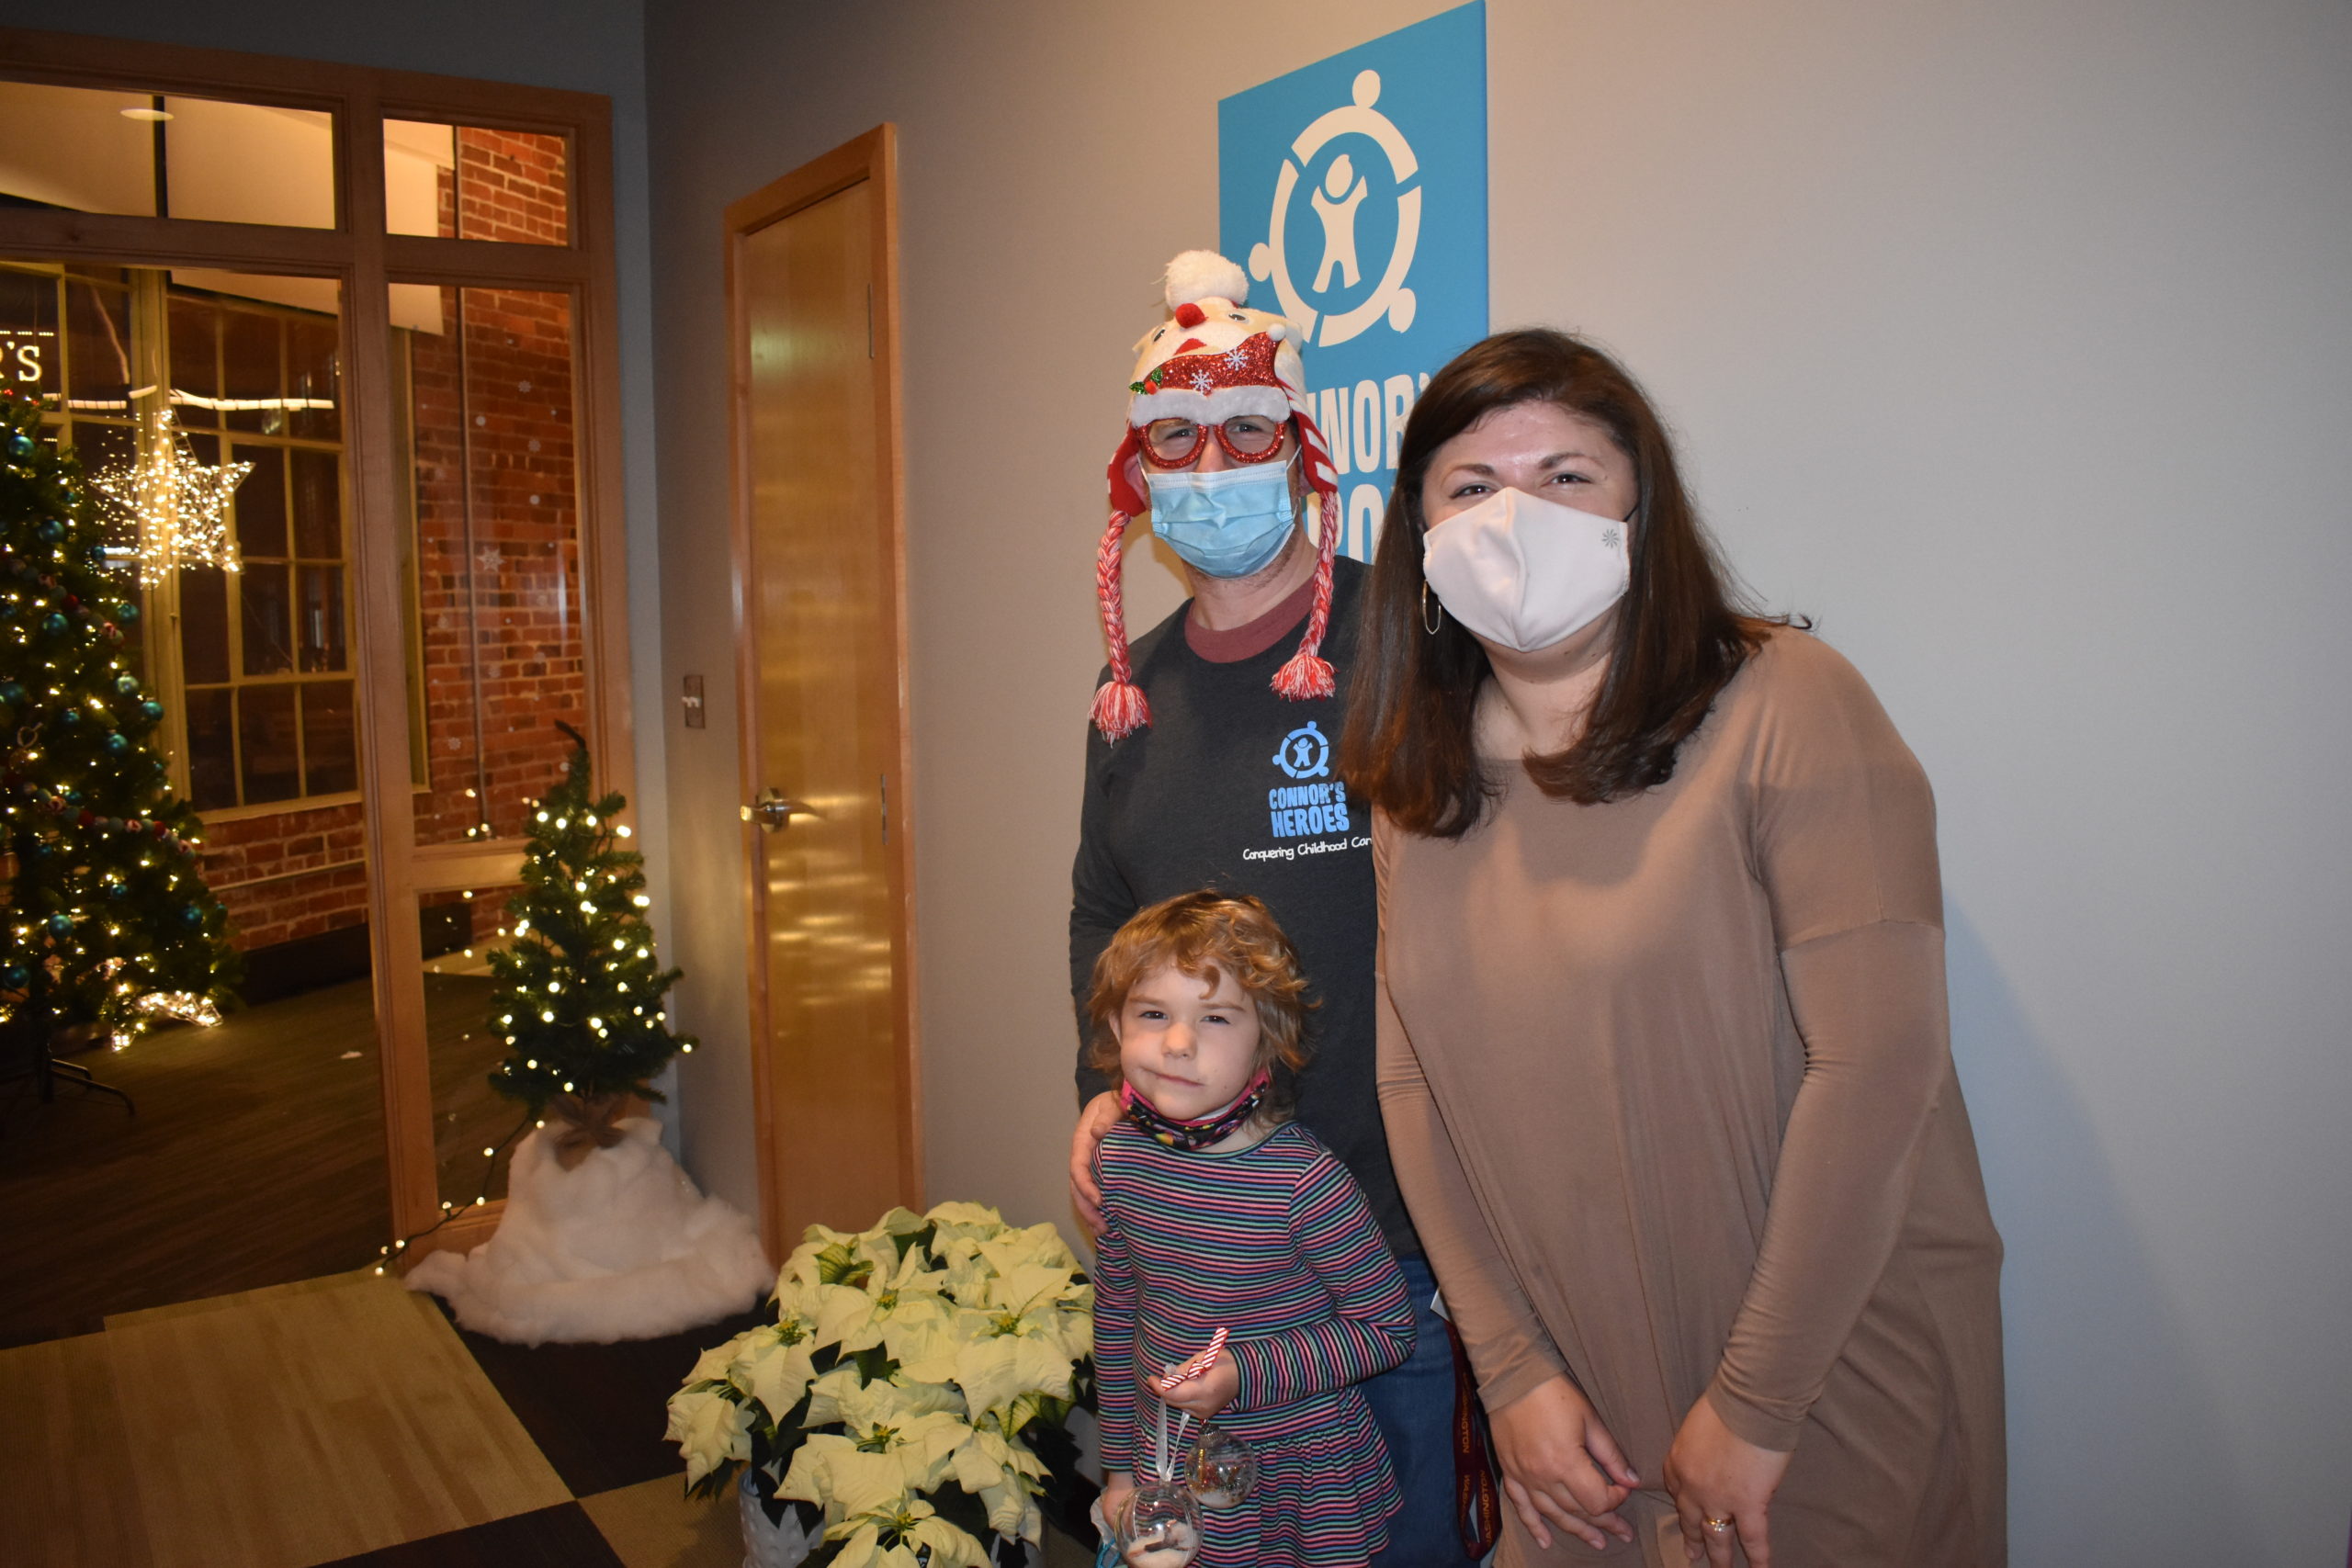 A man wearing a holiday hat is standing with a woman and a girl in an office decorated for a holiday party